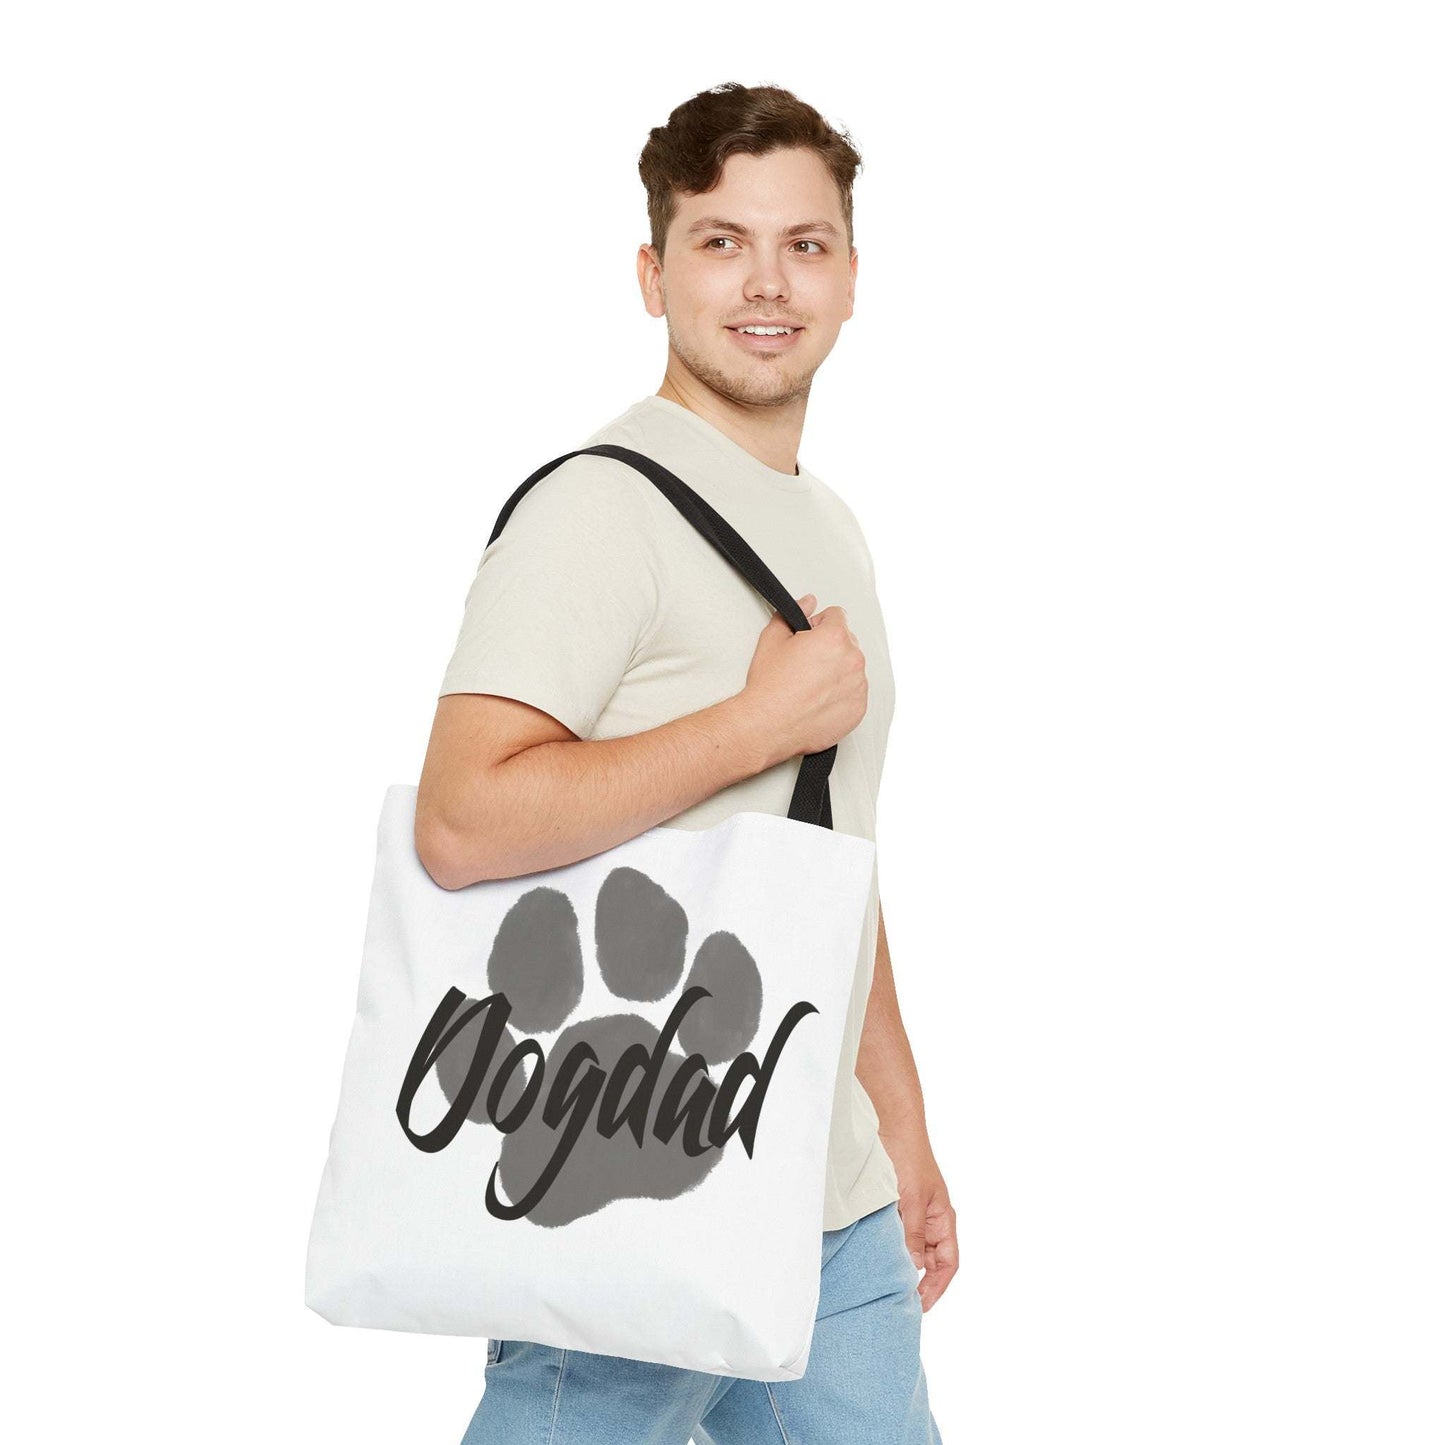 high-quality tote bags